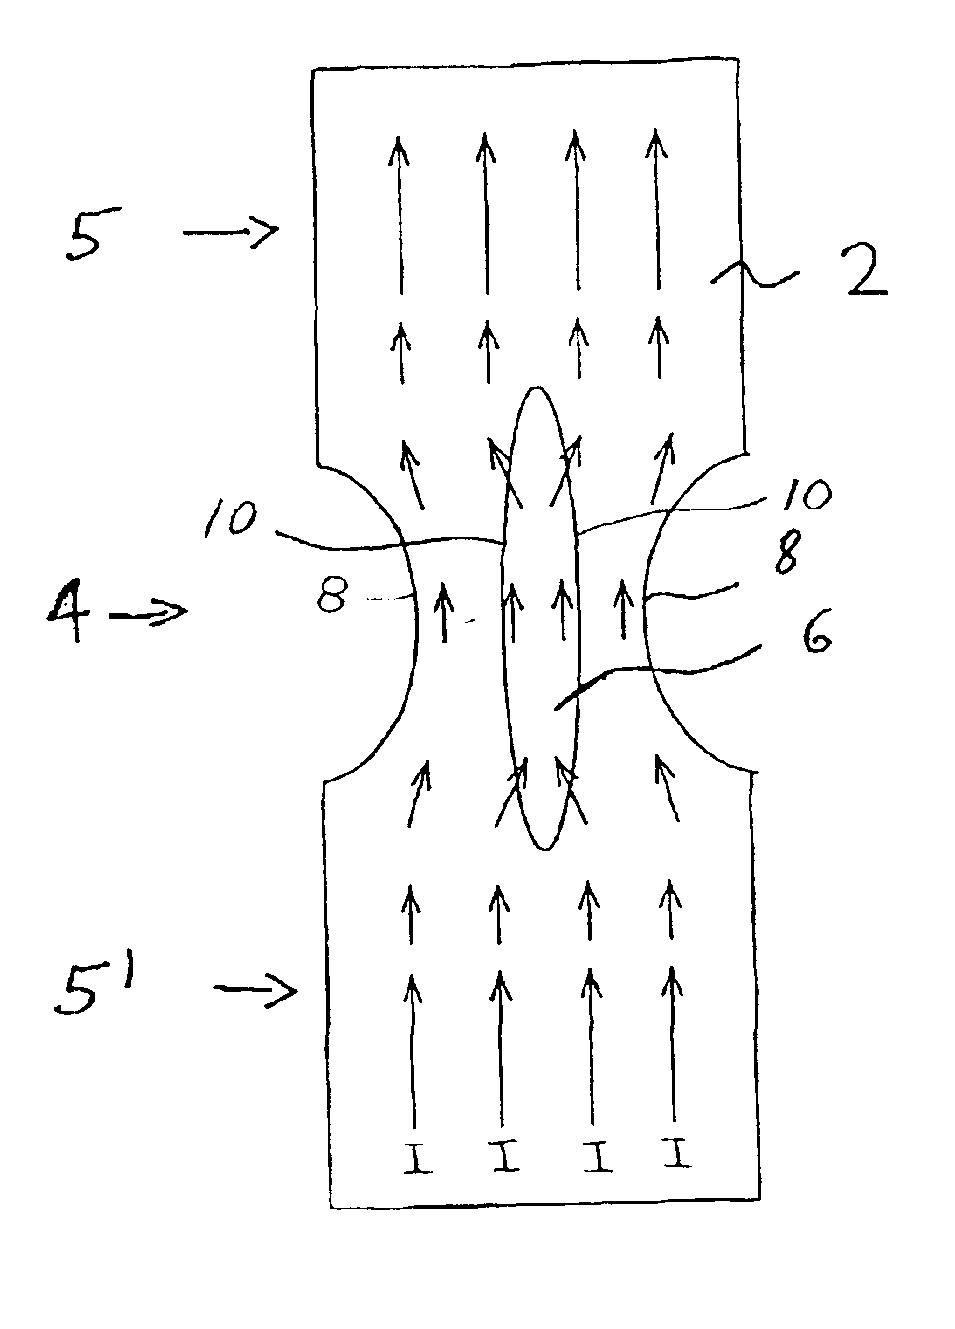 Areal electric conductor comprising a constriction